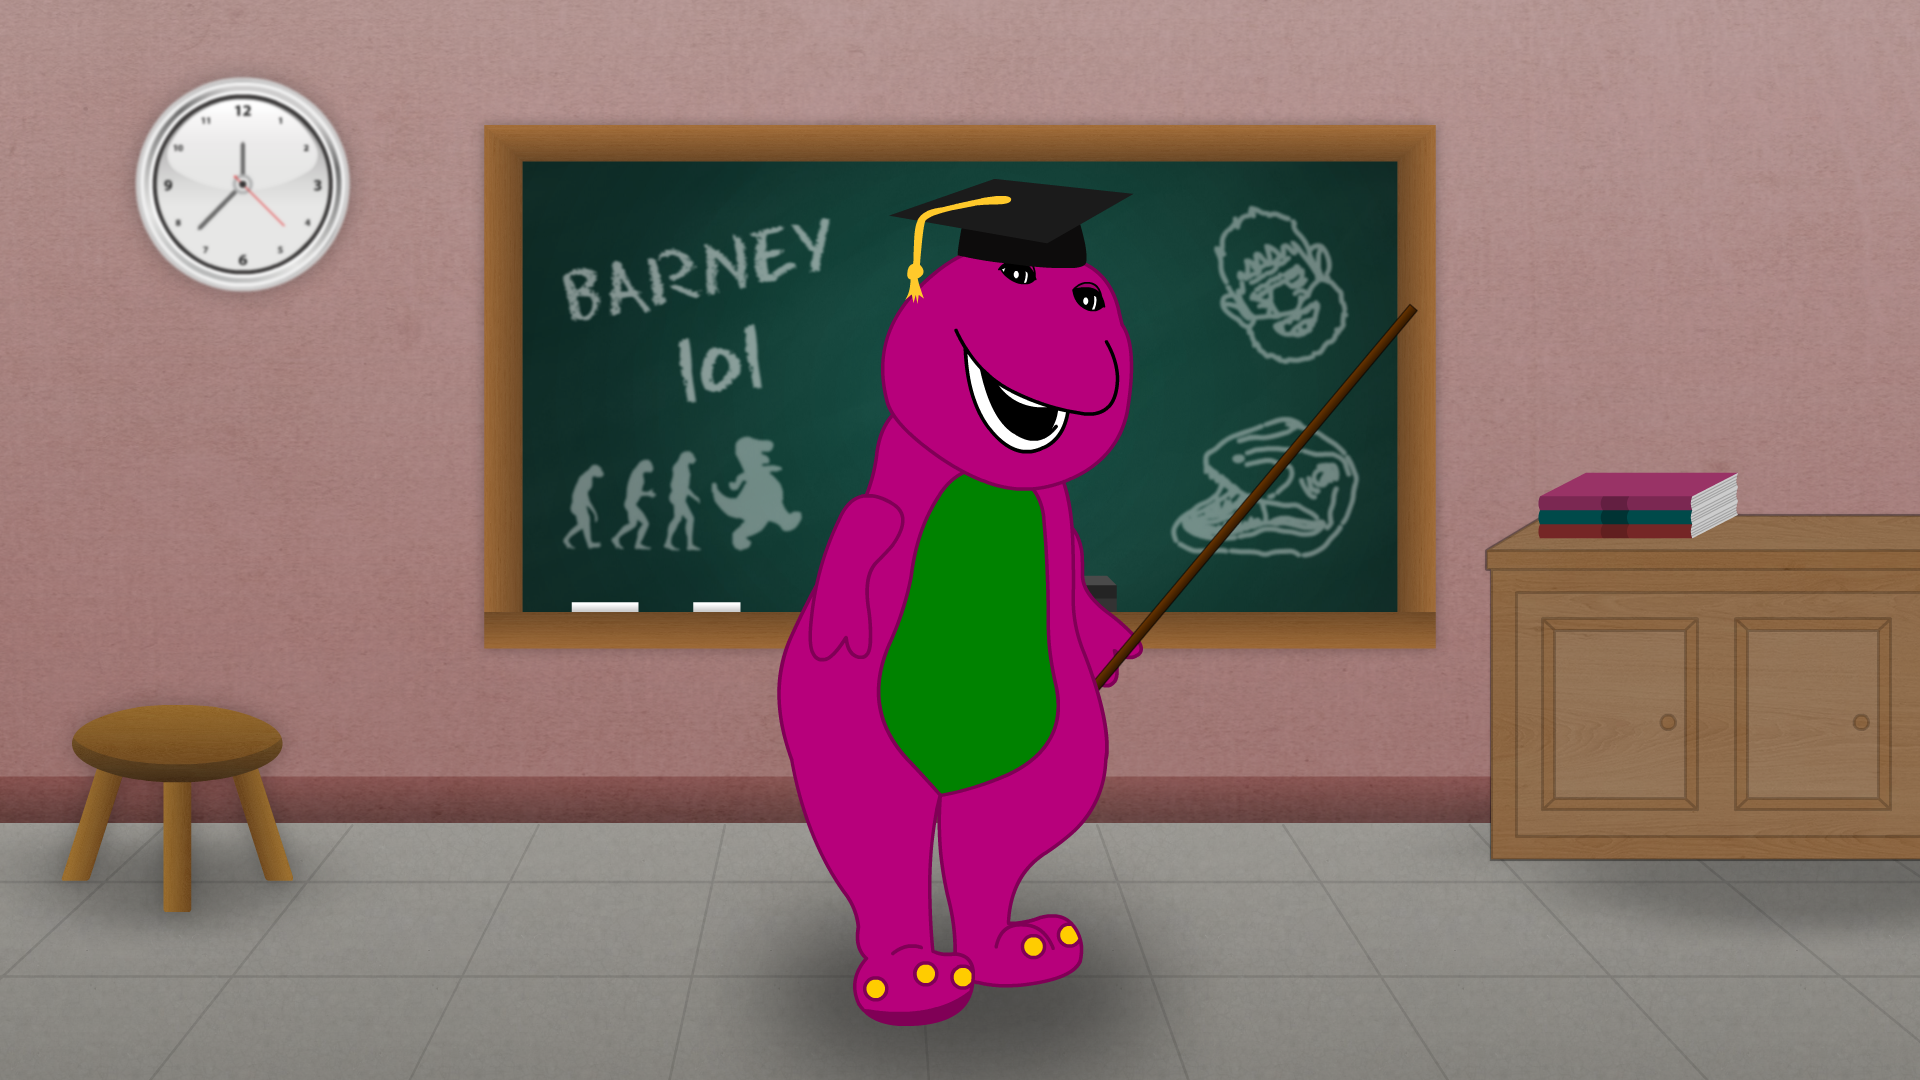 smith barney commercial